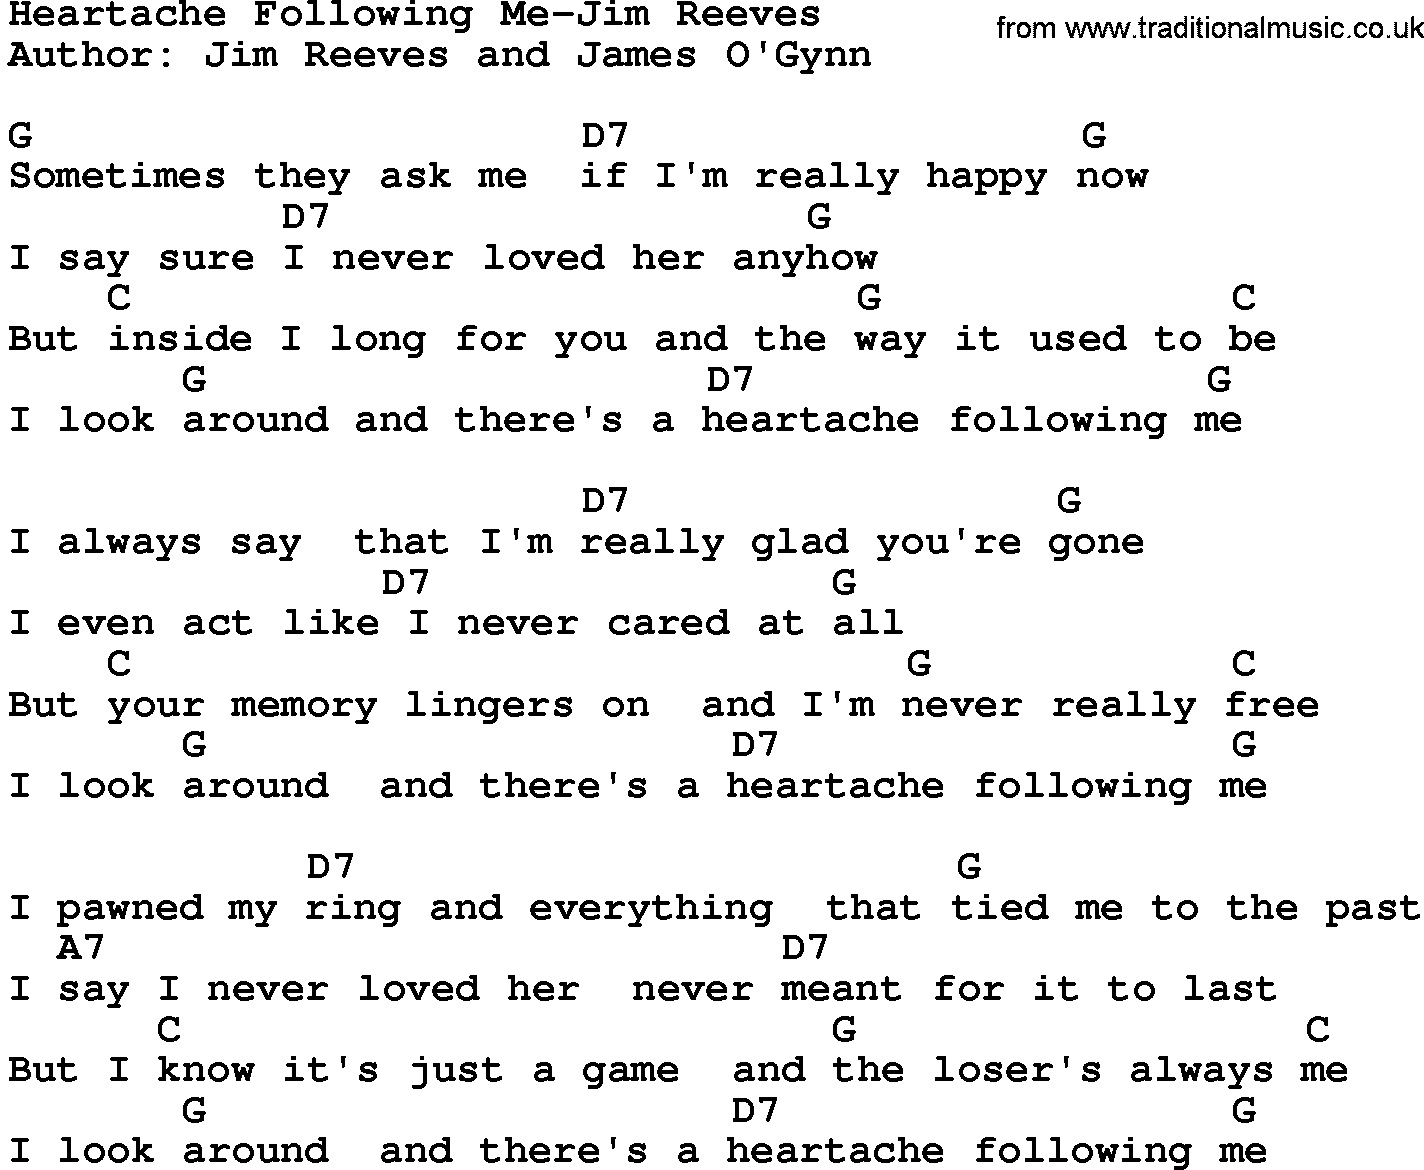 Country music song: Heartache Following Me-Jim Reeves lyrics and chords